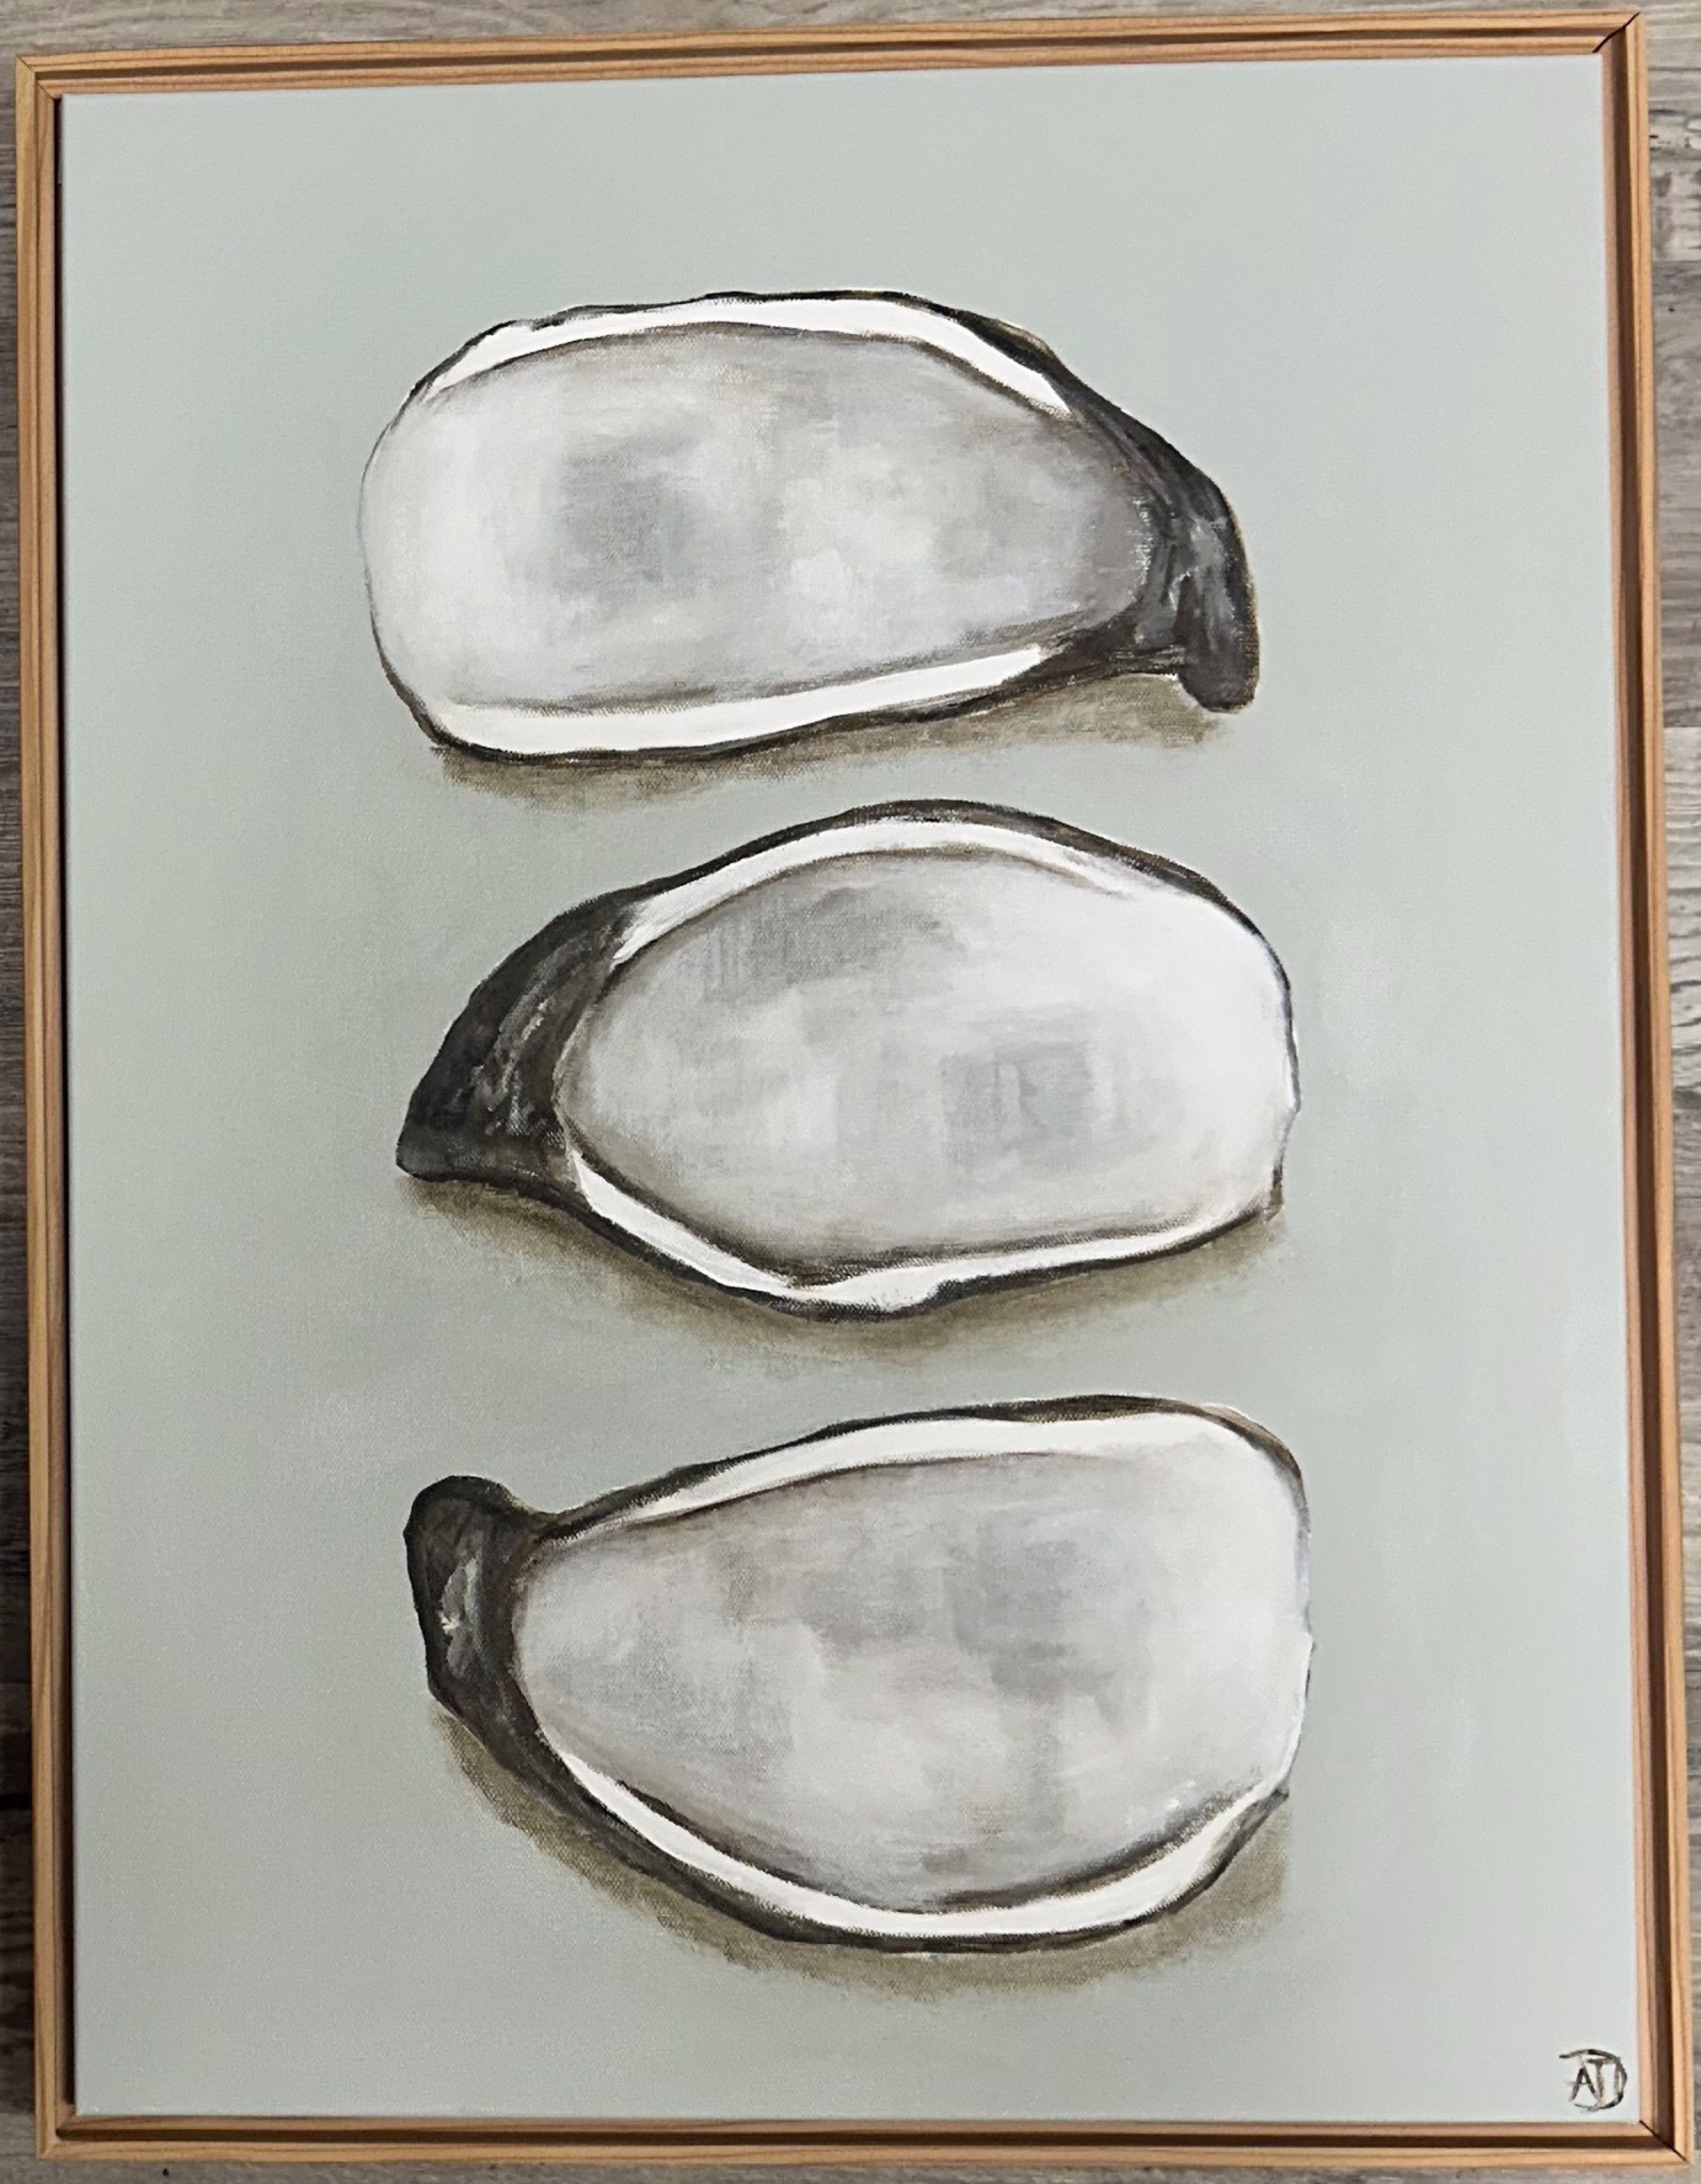 3 Oysters by Amy Duke